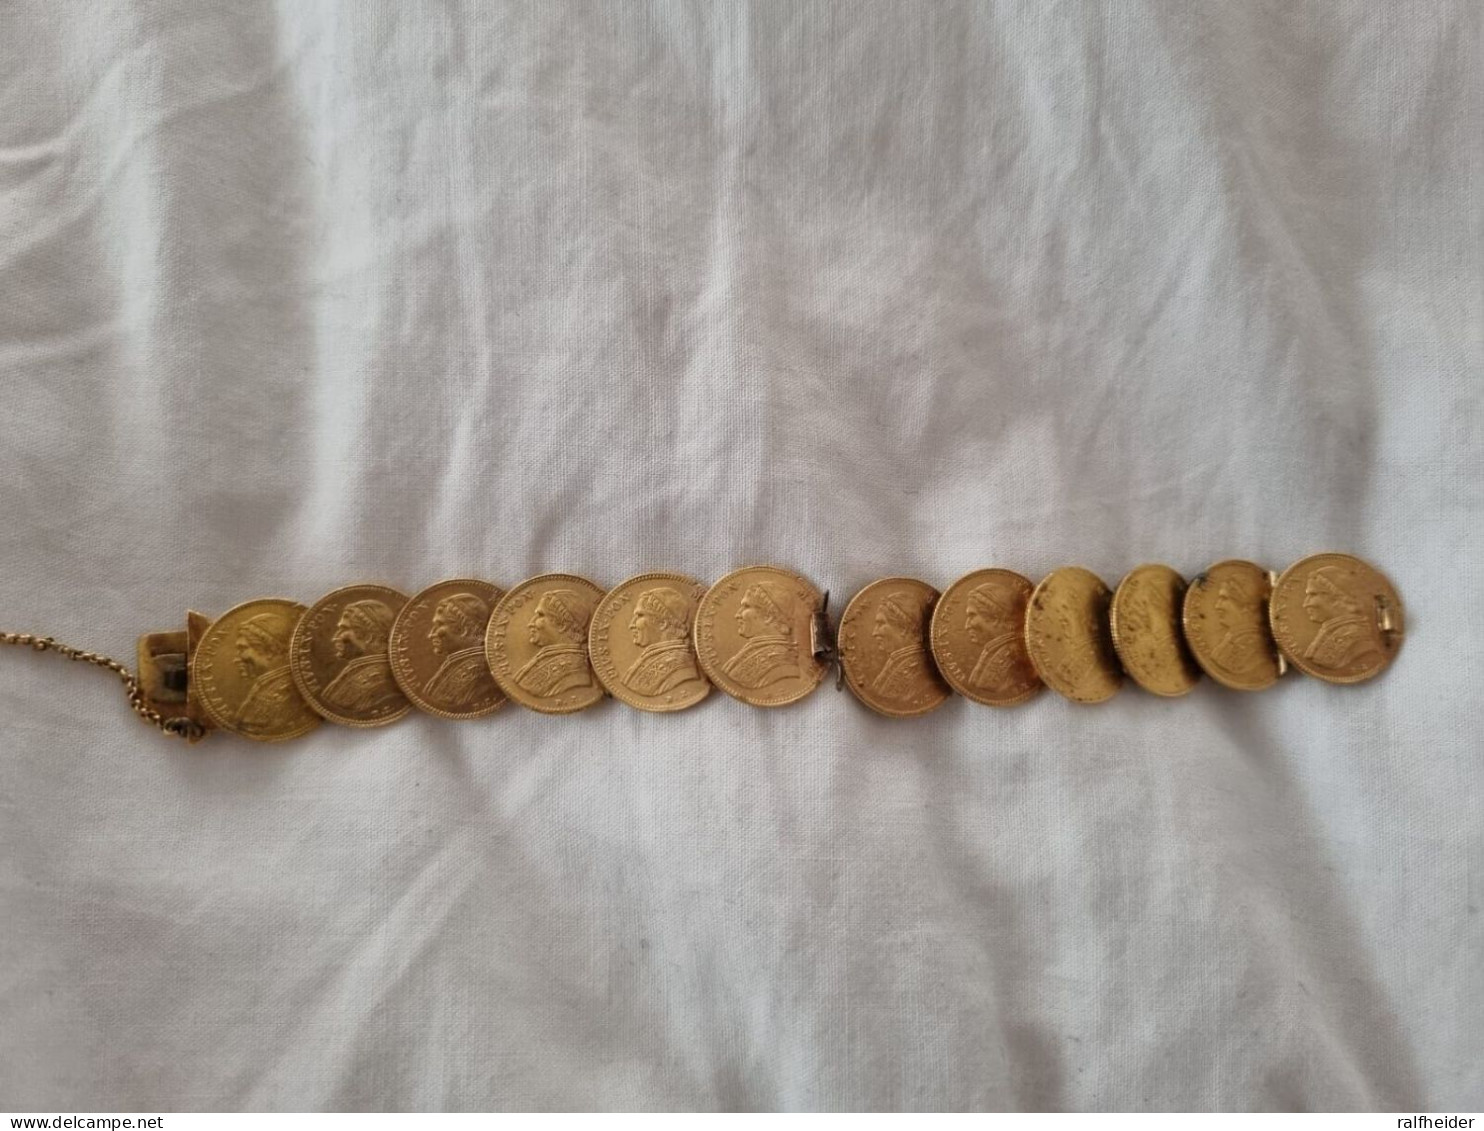 RARE ANTIQUE GOLD COIN BRACELET WITH 12 COINS ITALY-PAPAL STATE 1 SCUDO - Colecciones